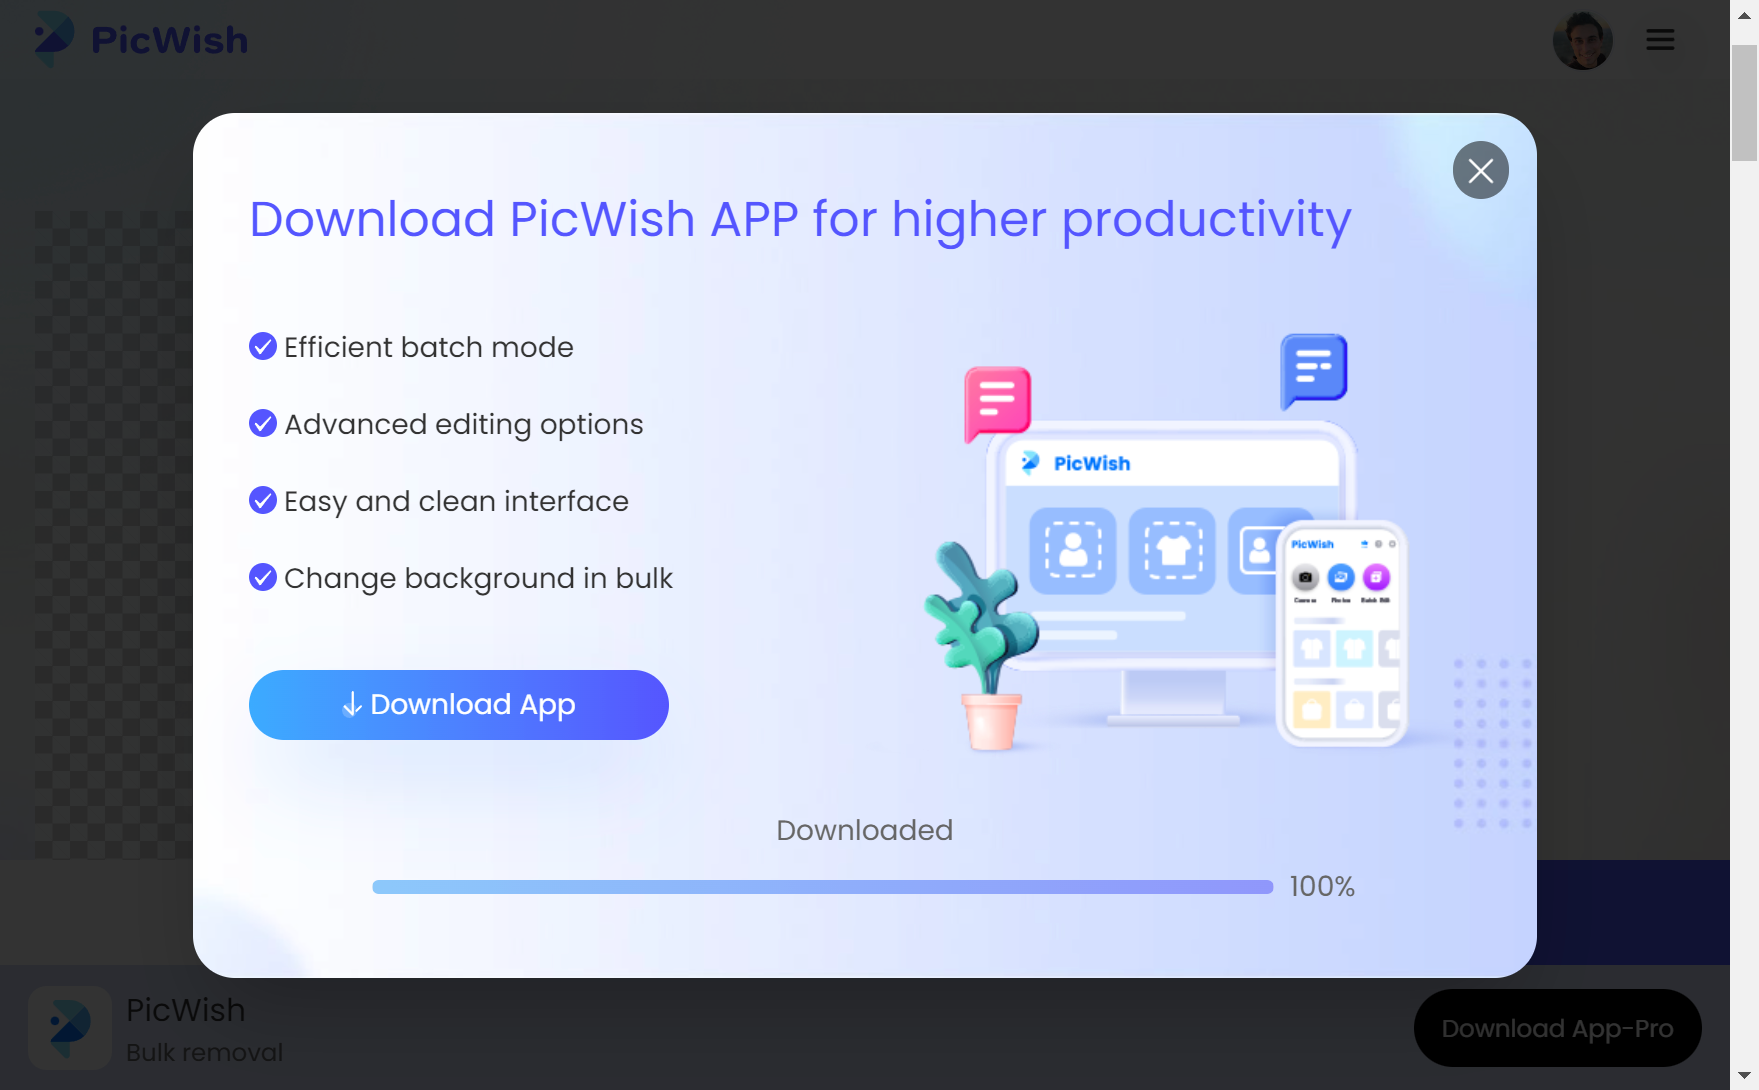 PicWish - download screen with loading bar, after clicking Download button.